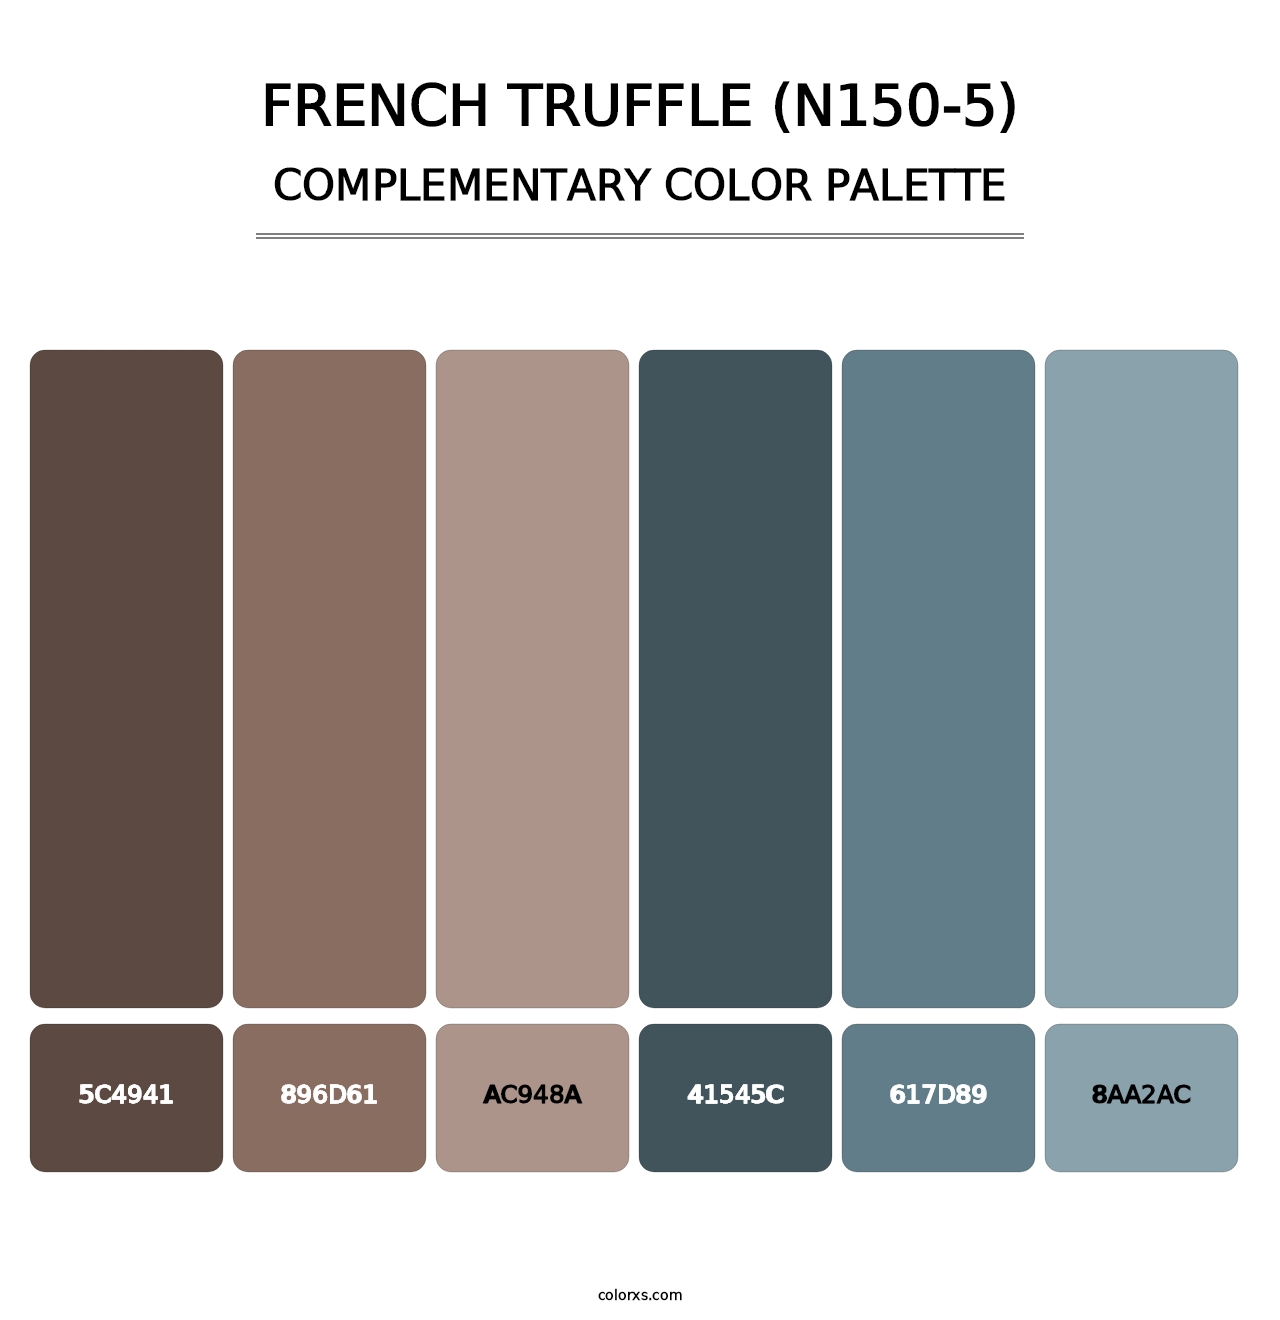 French Truffle (N150-5) - Complementary Color Palette